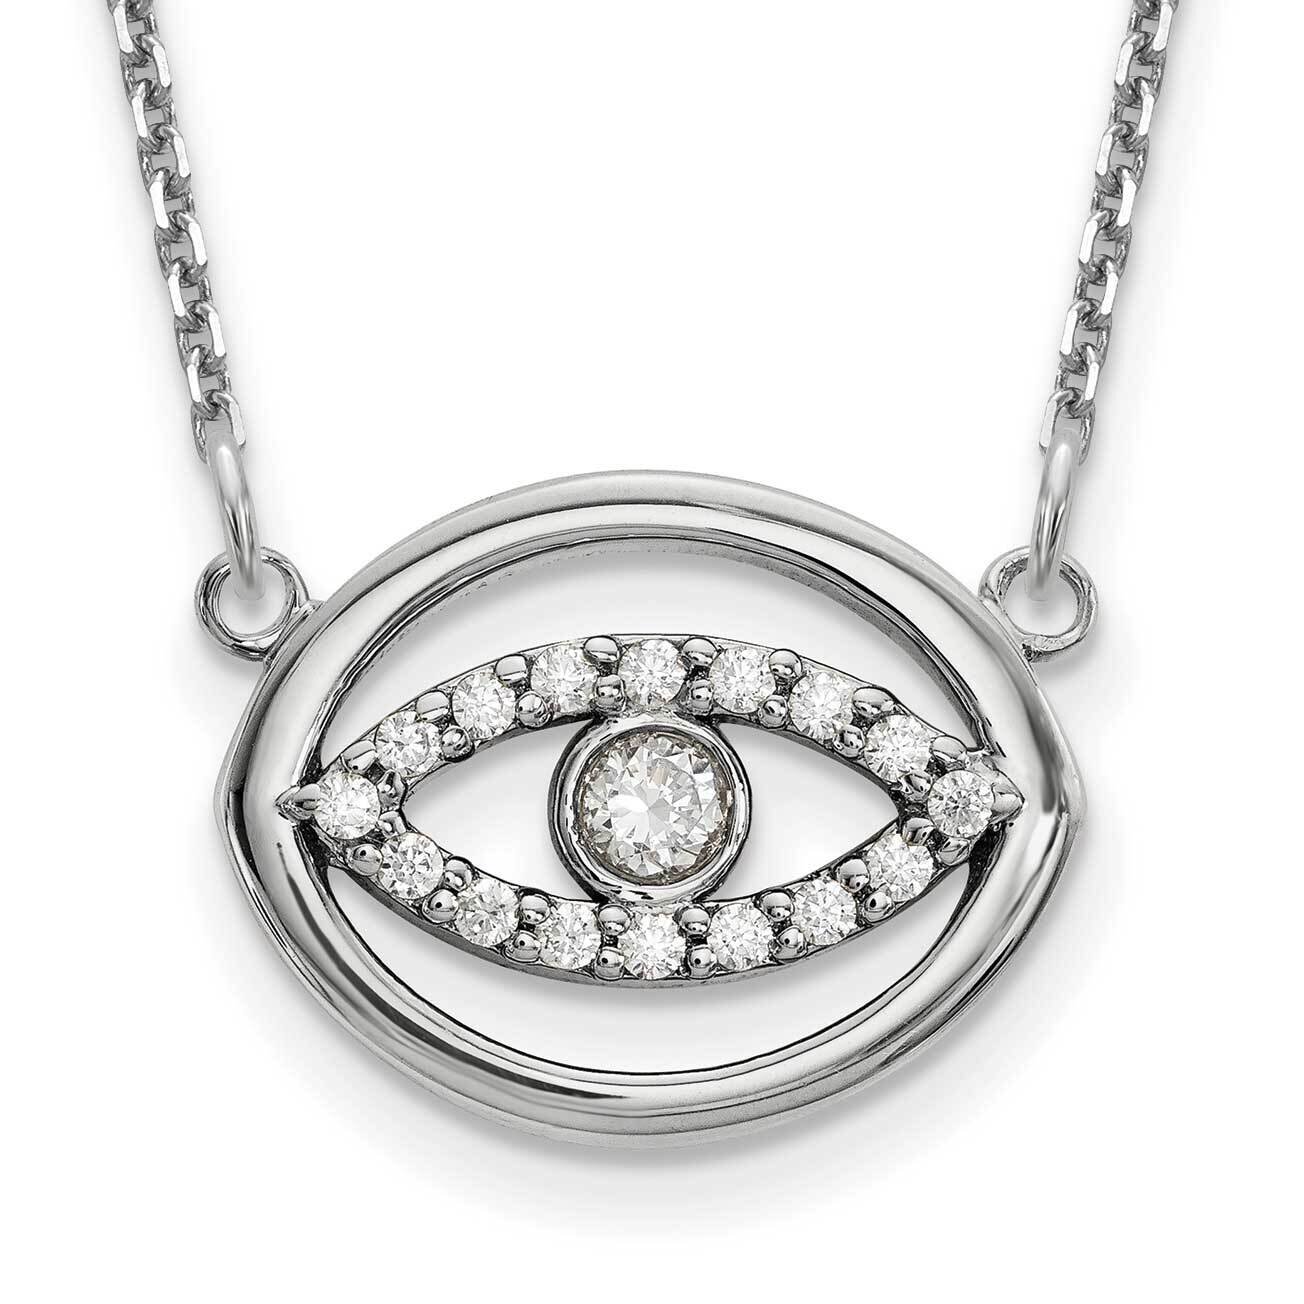 Gold Halo Evil Eye Necklace with Out Chain Mounting 18 Inch 14k White Gold Medium XP5039W